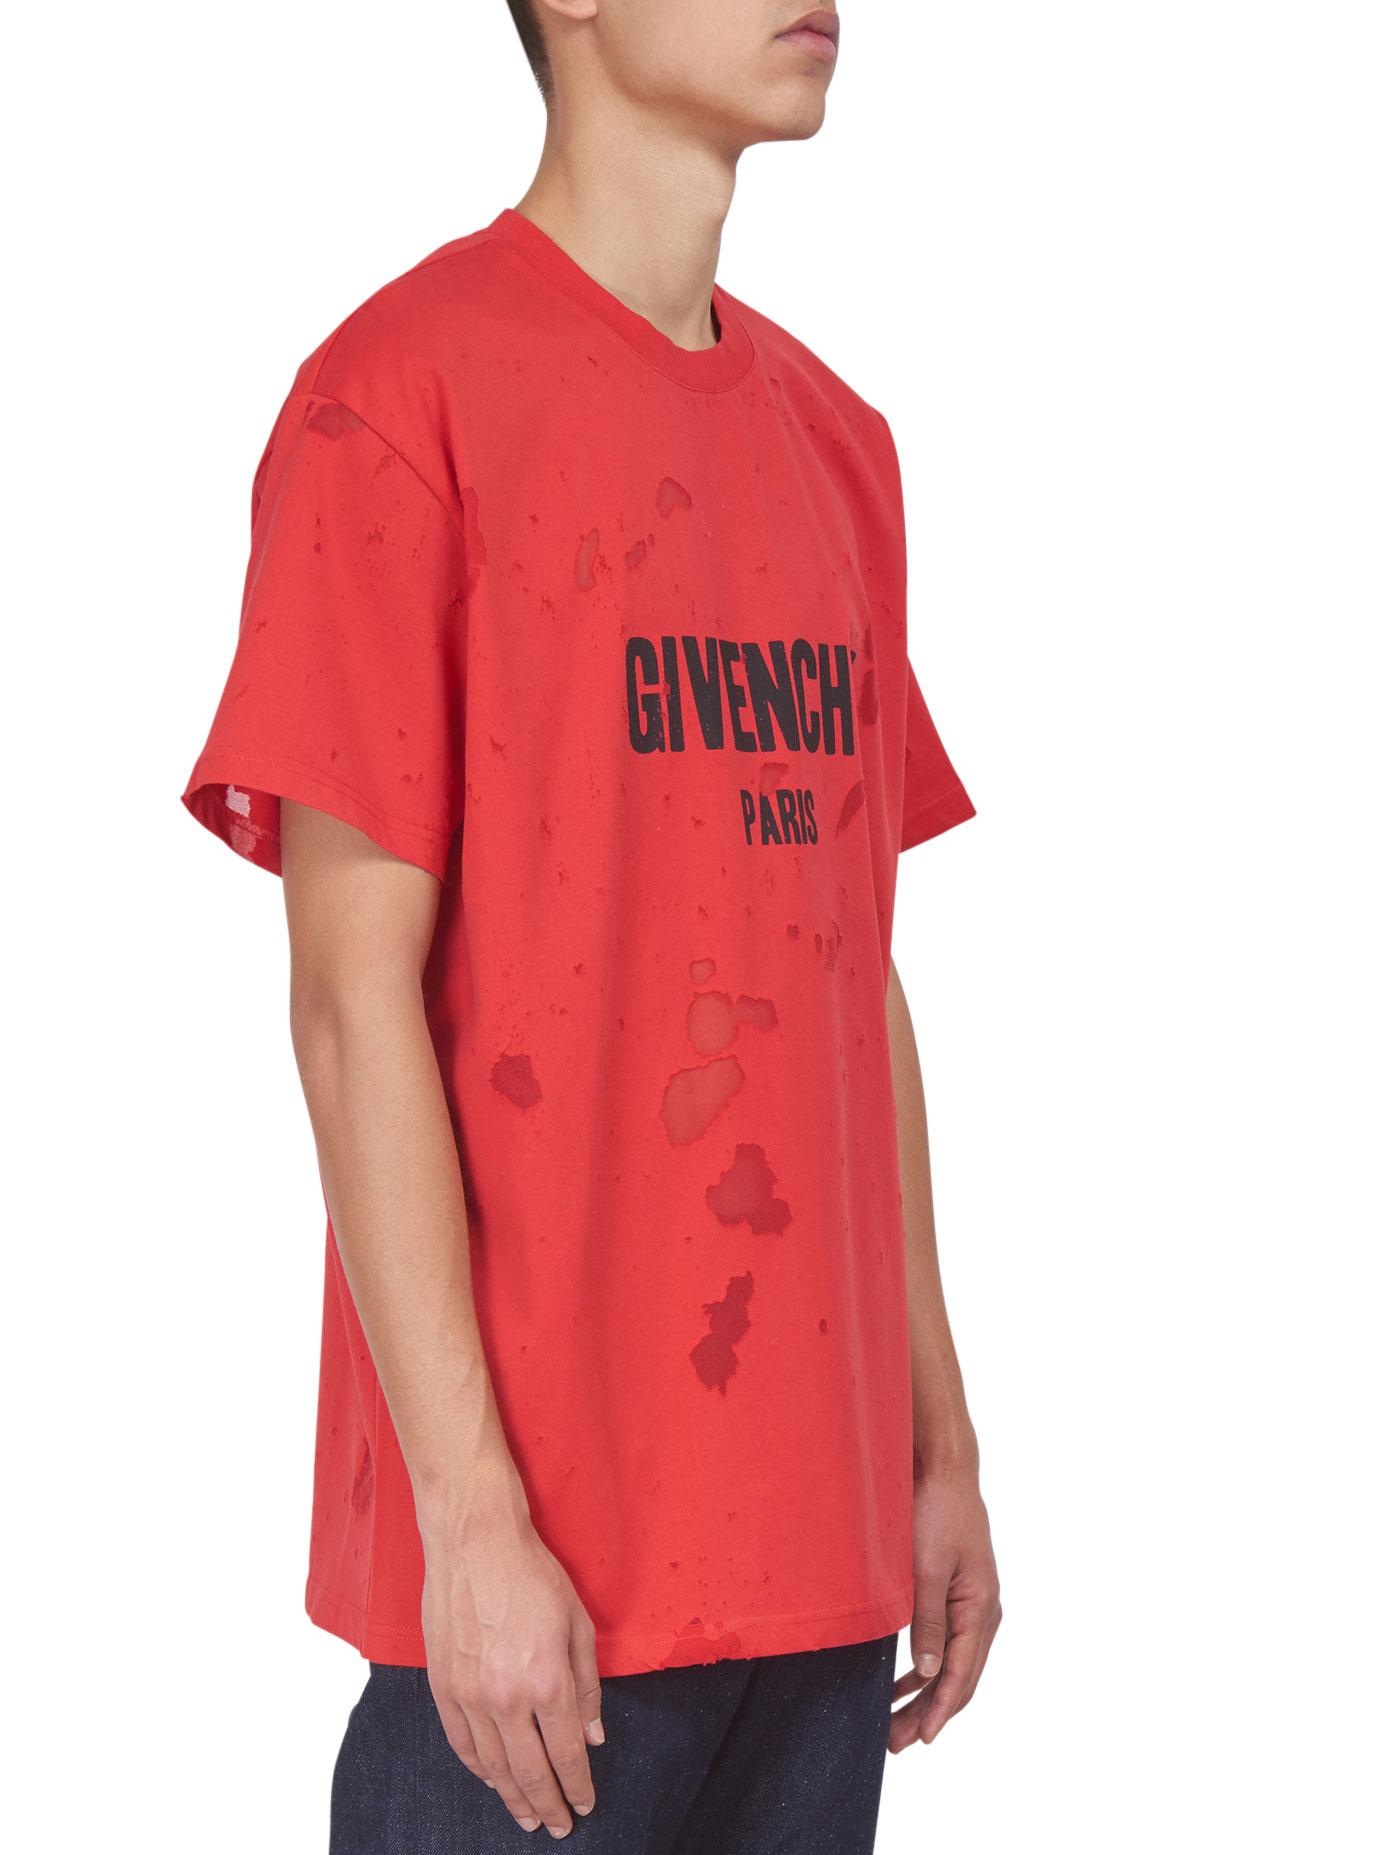 Givenchy Cotton Red Distressed Logo T-shirt for Men - Lyst